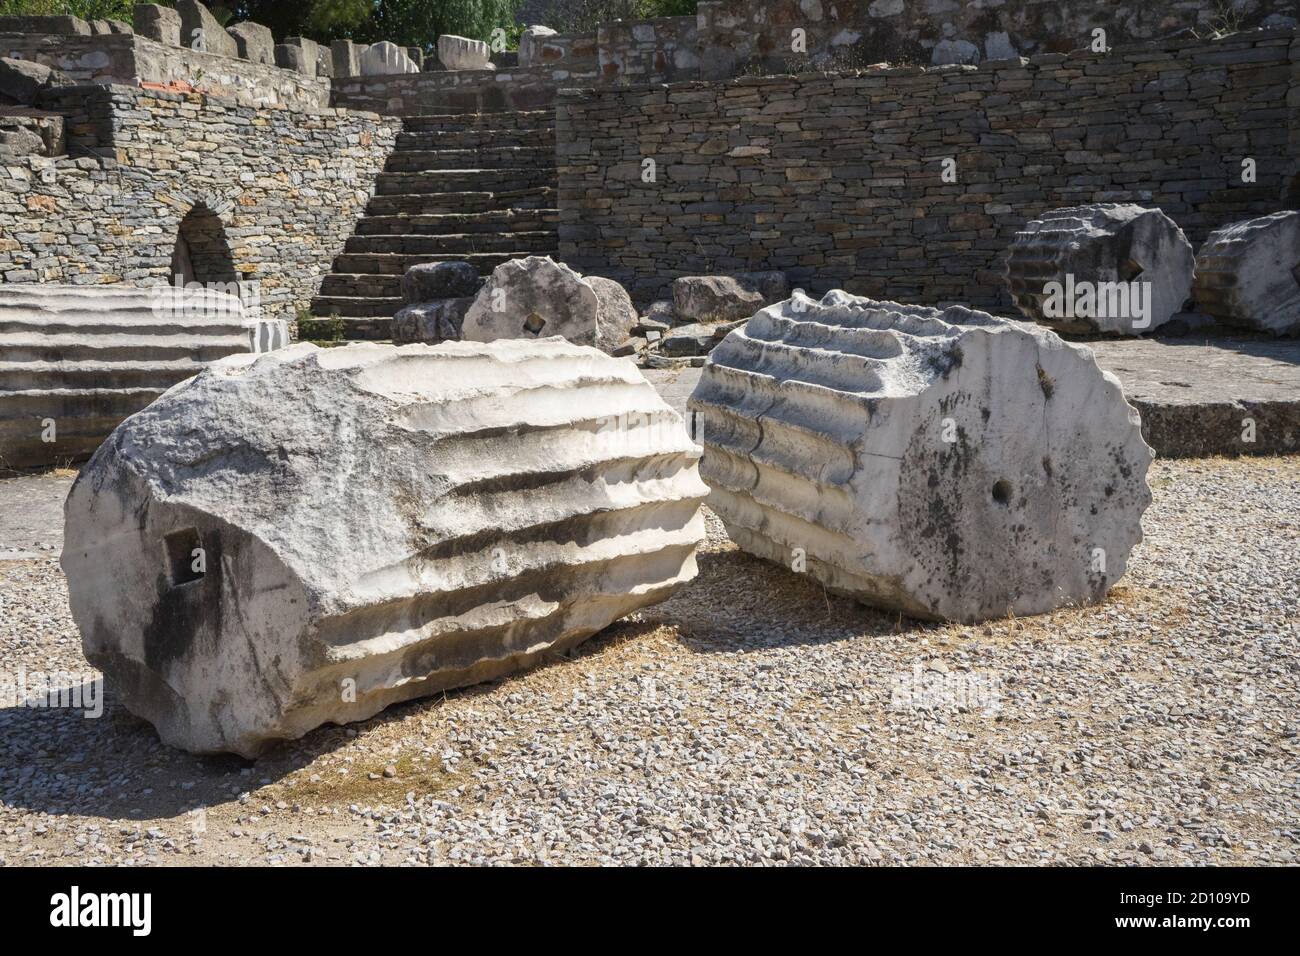 Fragments of ancient greek columns close up. The ruins of the Mausoleum at Halicarnassus, Bodrum, Turkey. Stock Photo